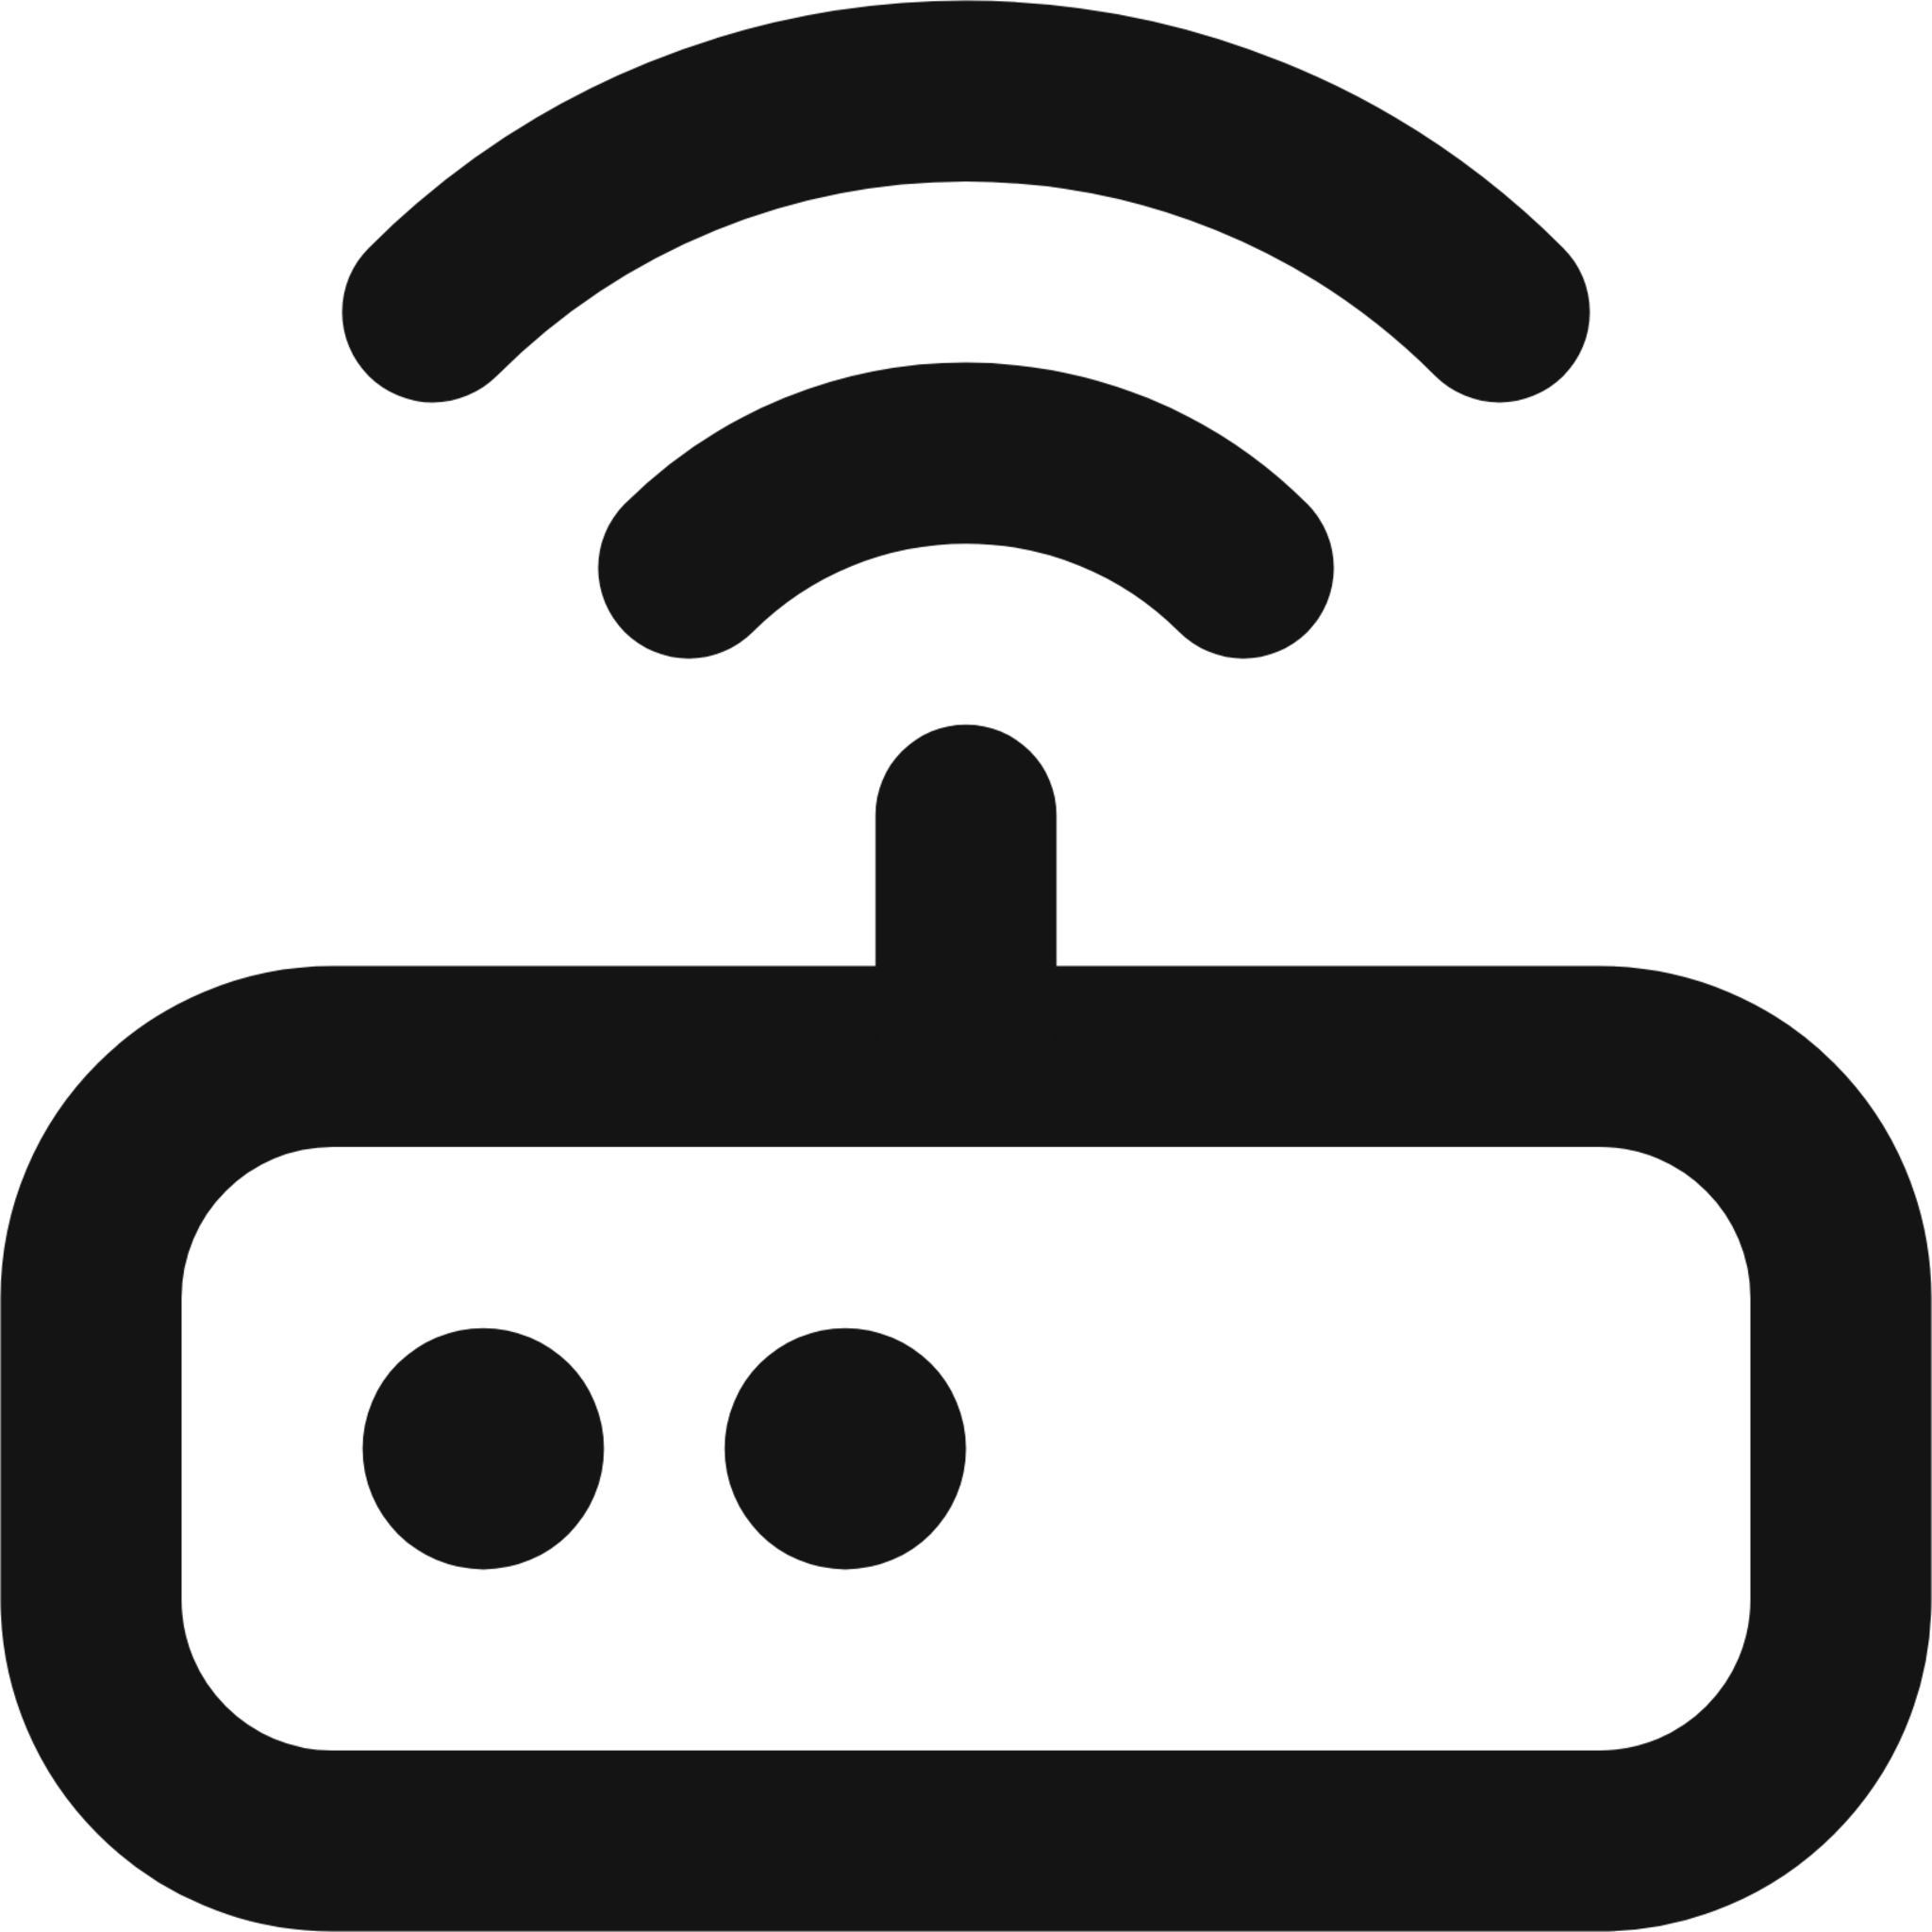 router icon